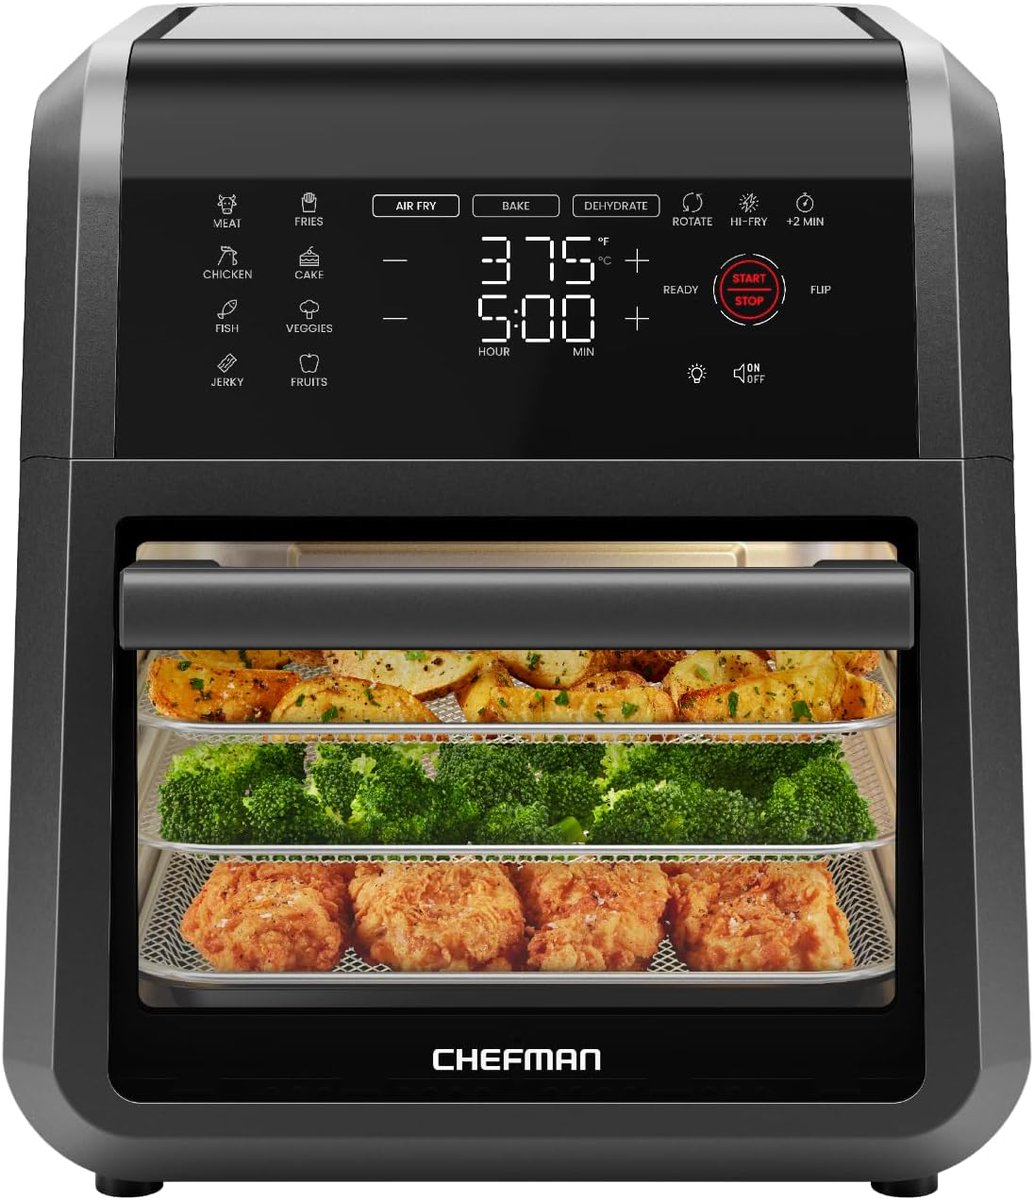 Select Chefman Air Fryer, Pizza Ovens, and More -- Up to 36% off -- FROM $21.99

amzn.to/49qYCx6

#airfryer #airfryers #airfryerdeals #airfryerdeal #pizzaoven #pizzaovens #pizzaovendeals #pizzaovendeal #kitchenappliance #kitchenappliances #kitchenappliancedeals #kitchen